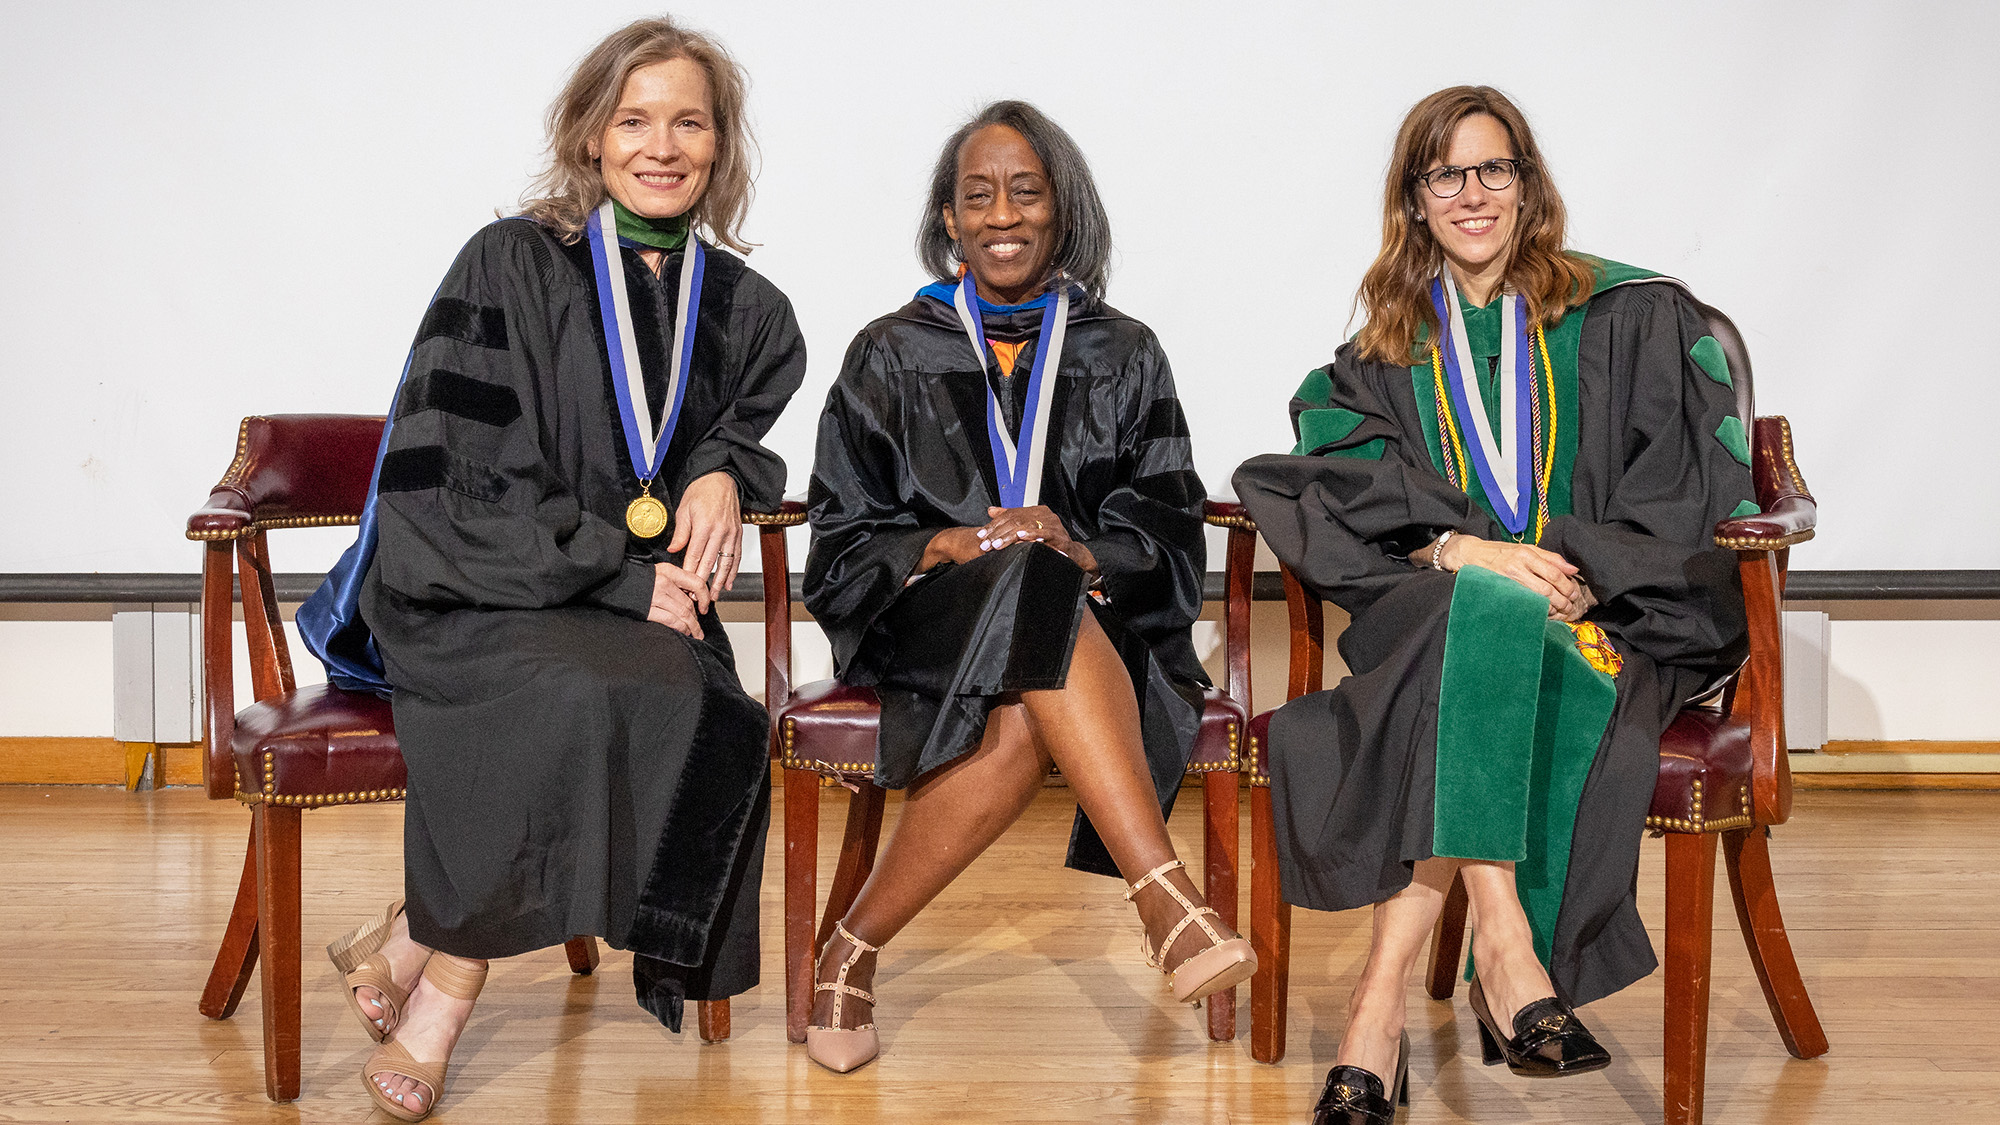 Amy Burke, MD, MPH; Donna Cameron, PhD, MPH; and Mary Furlong, MD, sit in chairs on a stage wearing their academic regalia and MAGIS medallions